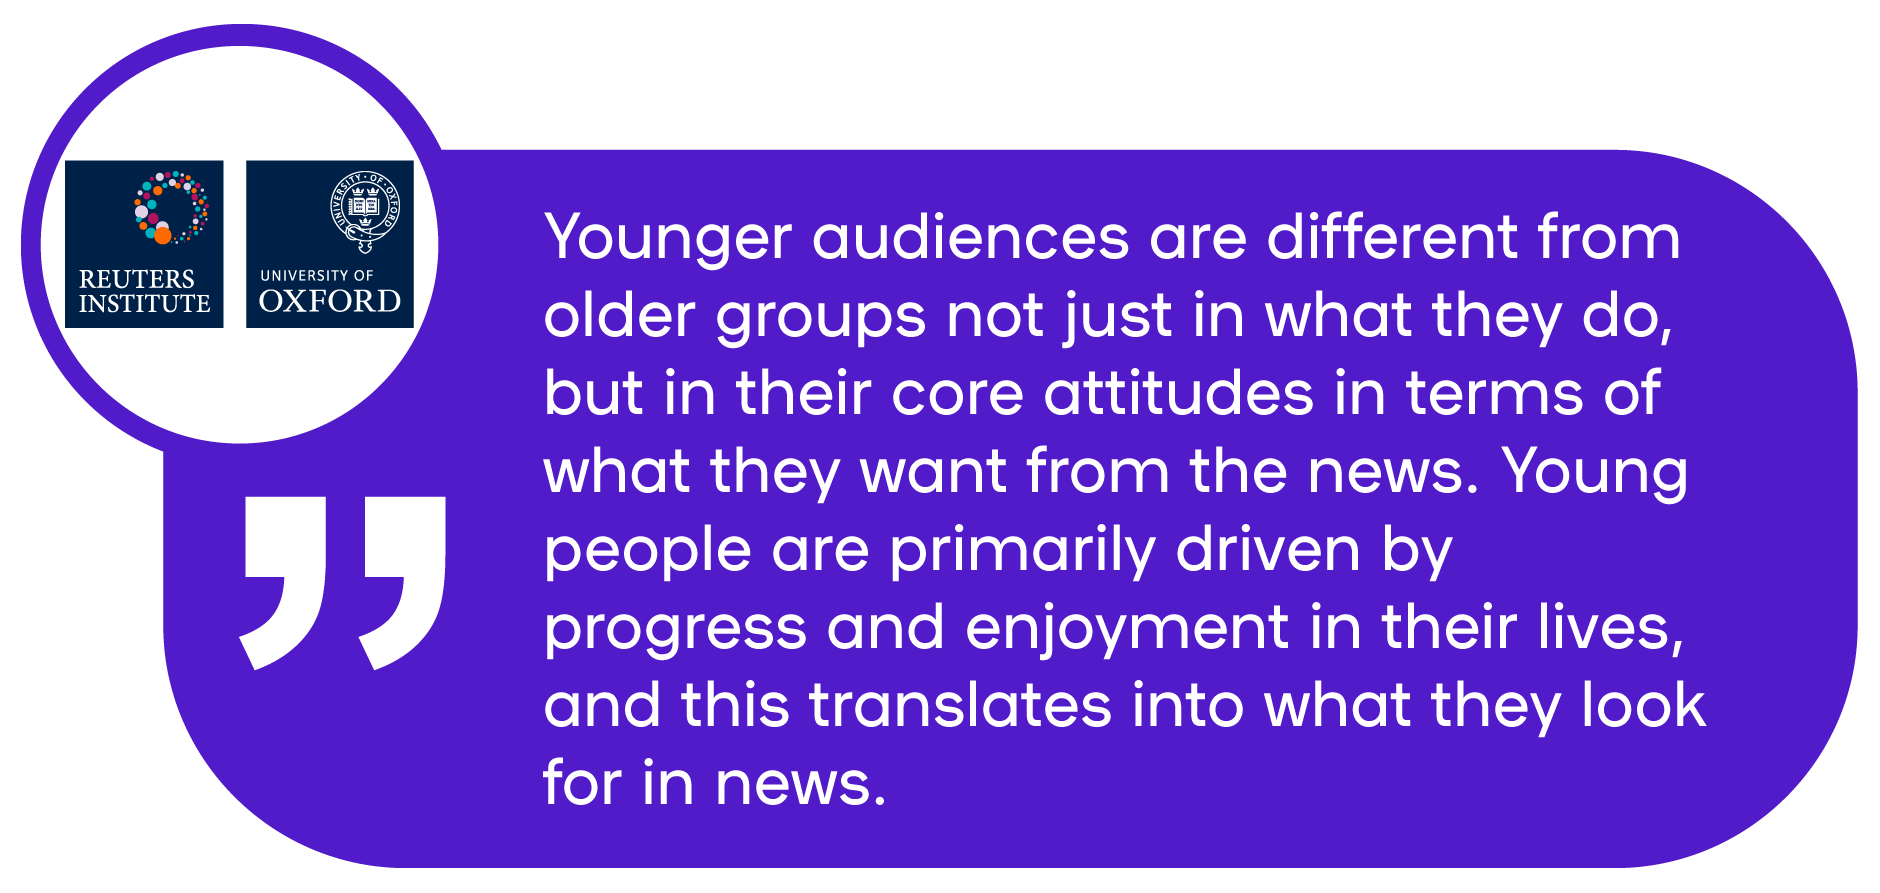 Reuters: young audiences differ from older ones when it comes to what they want from news